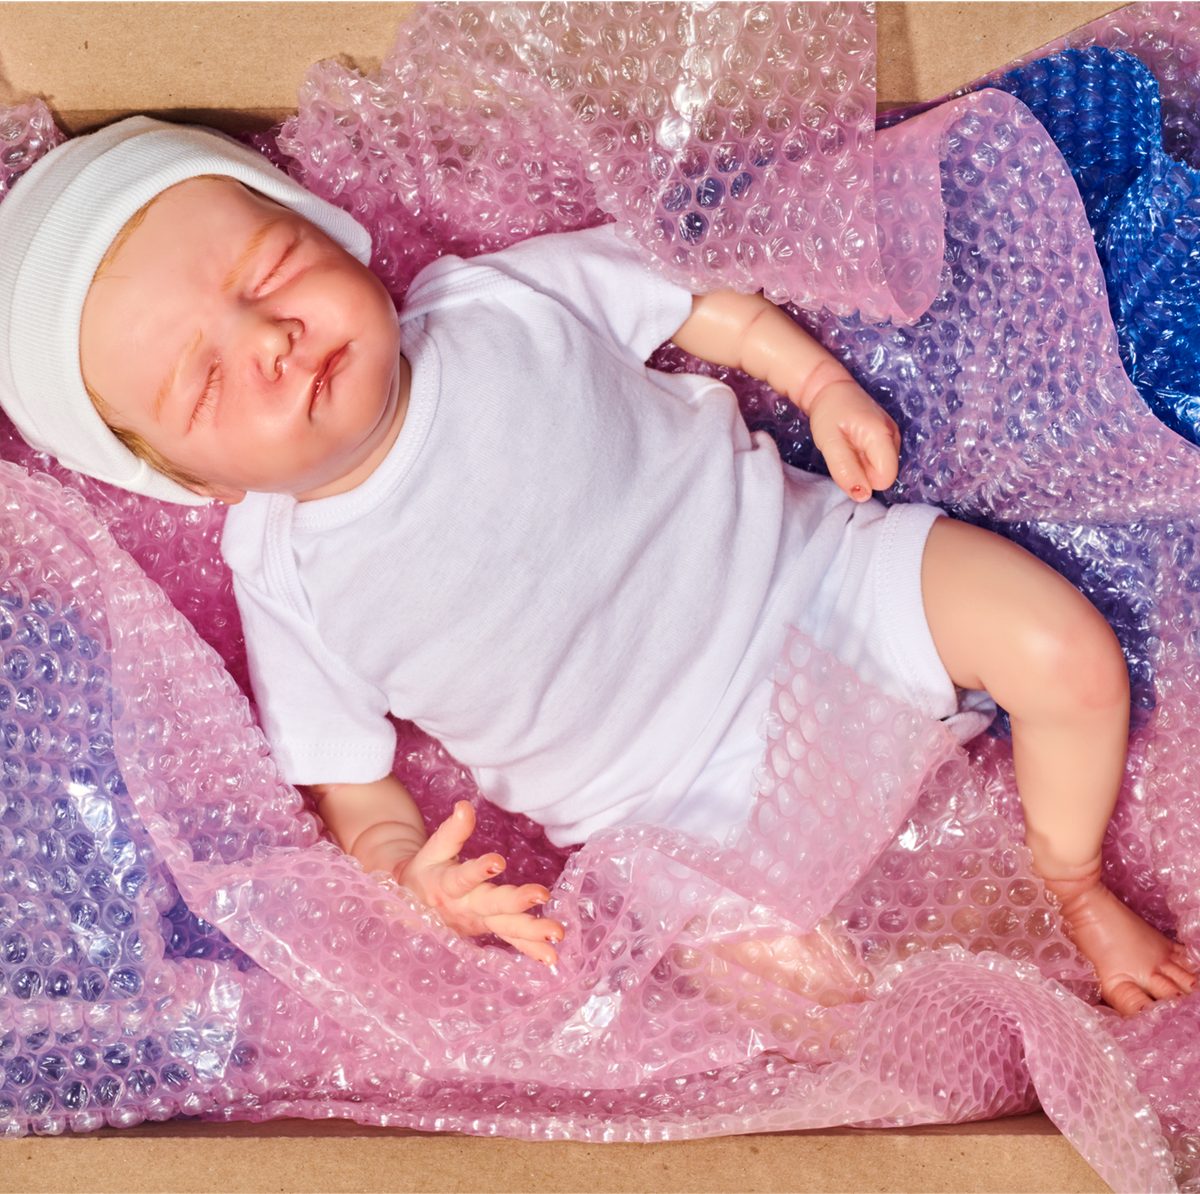 Why Reborn Baby Dolls Are so Expensive